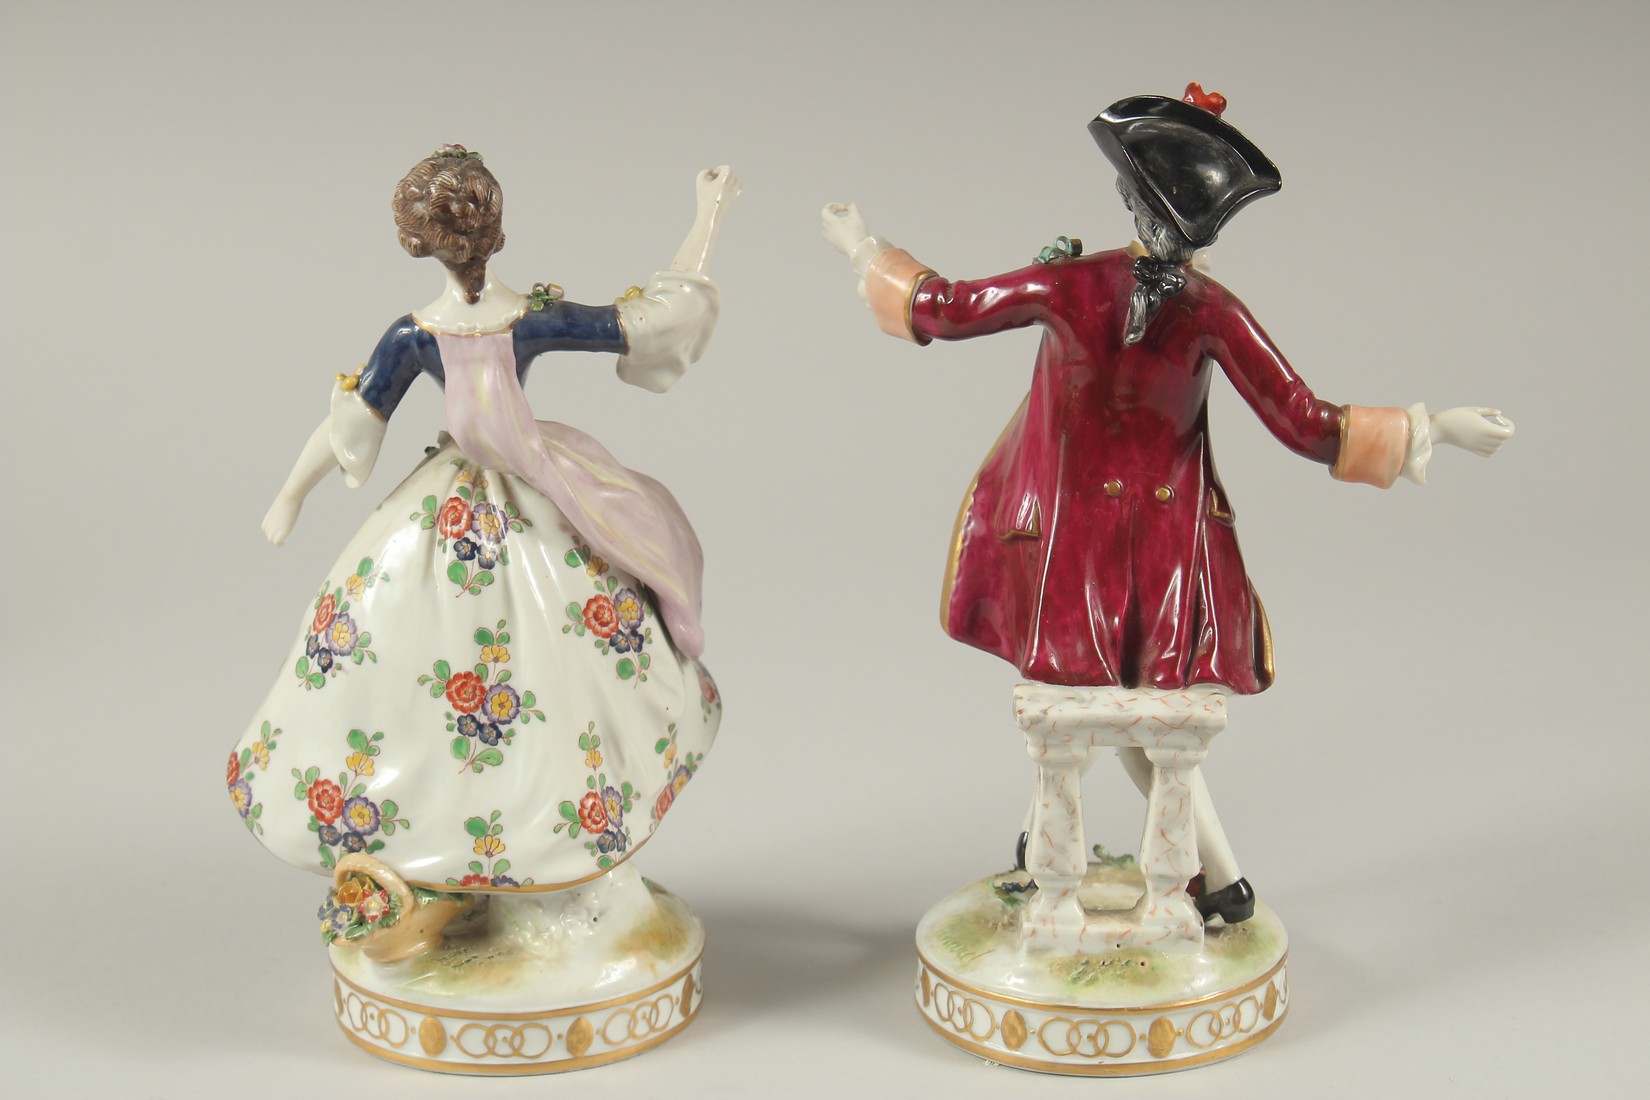 A GOOD PAIR OF PORCELAIN FIGURES OF A GALLANT AND LADY DANCING, on circular bases. 9ins high. - Image 4 of 7